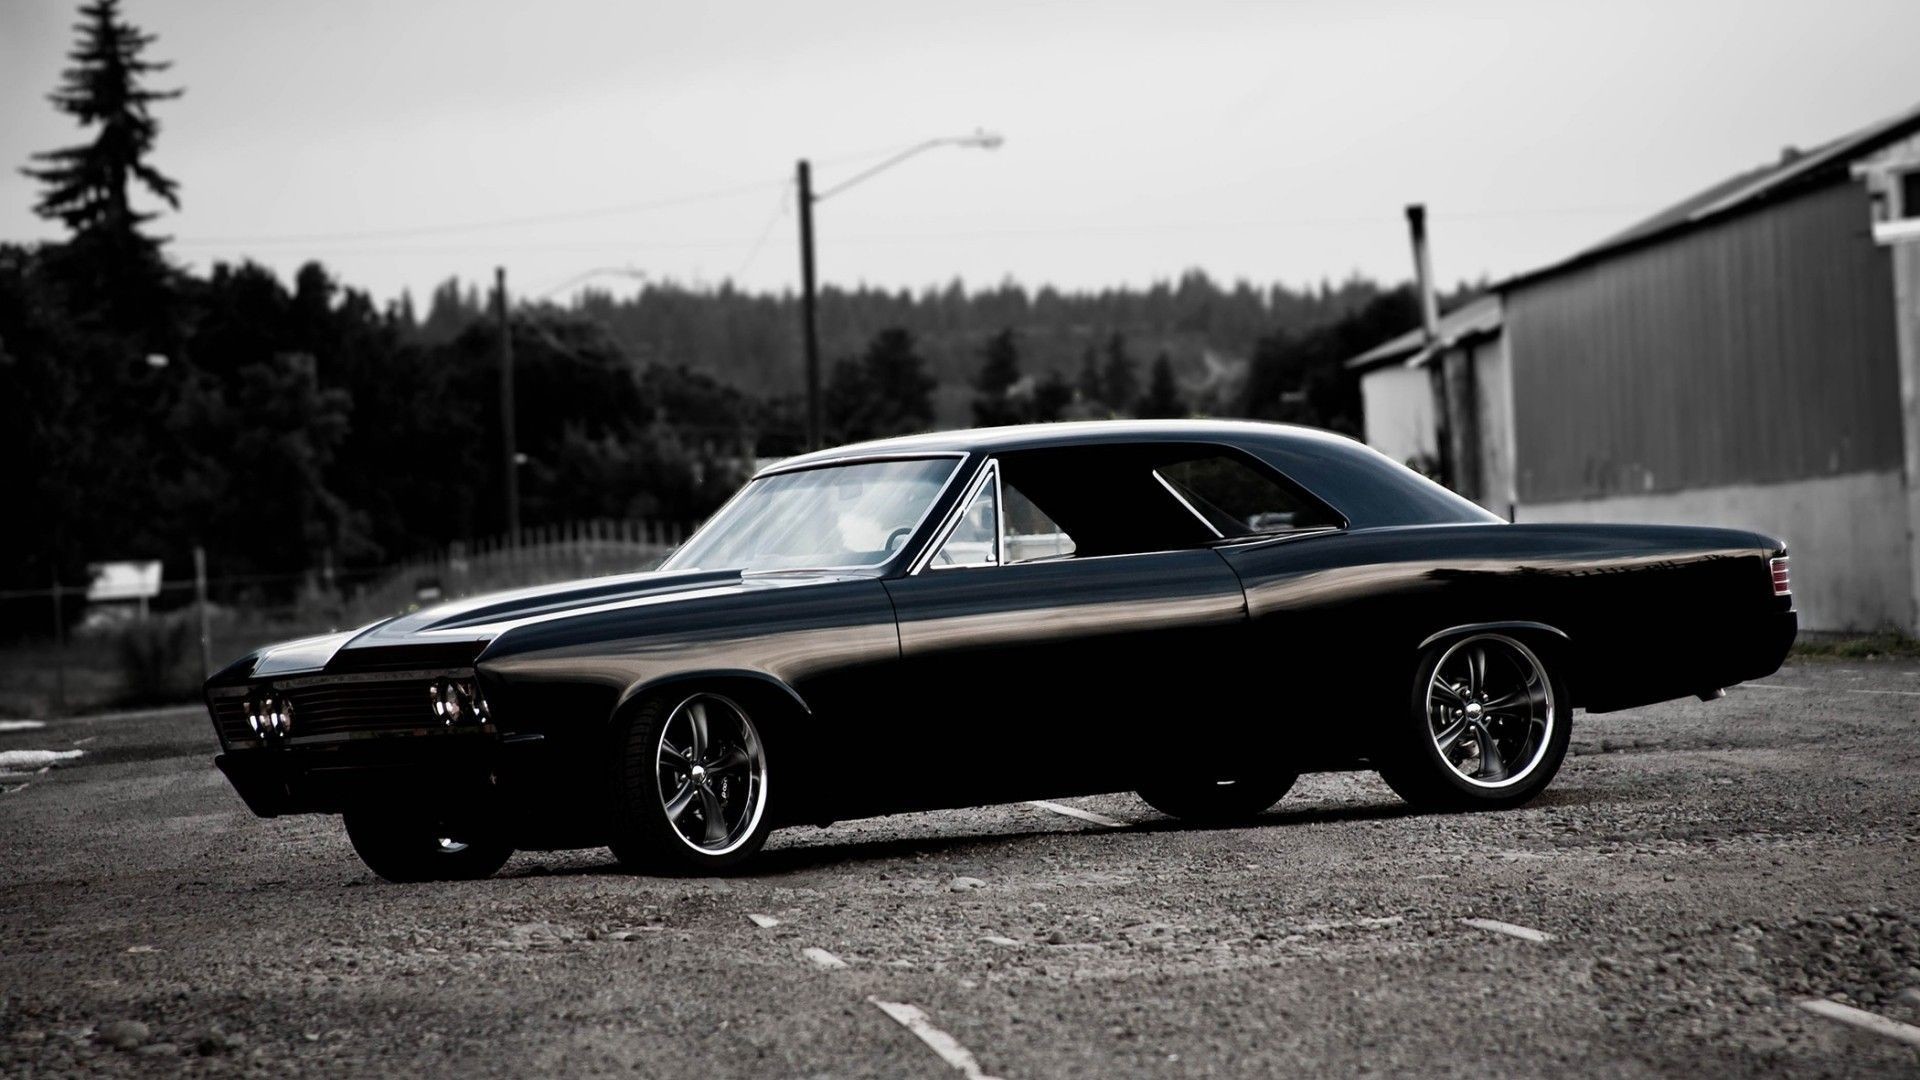 1920x1080 Old Muscle Car HD Background Wallpapers 1737 - HD Wallpaper Site